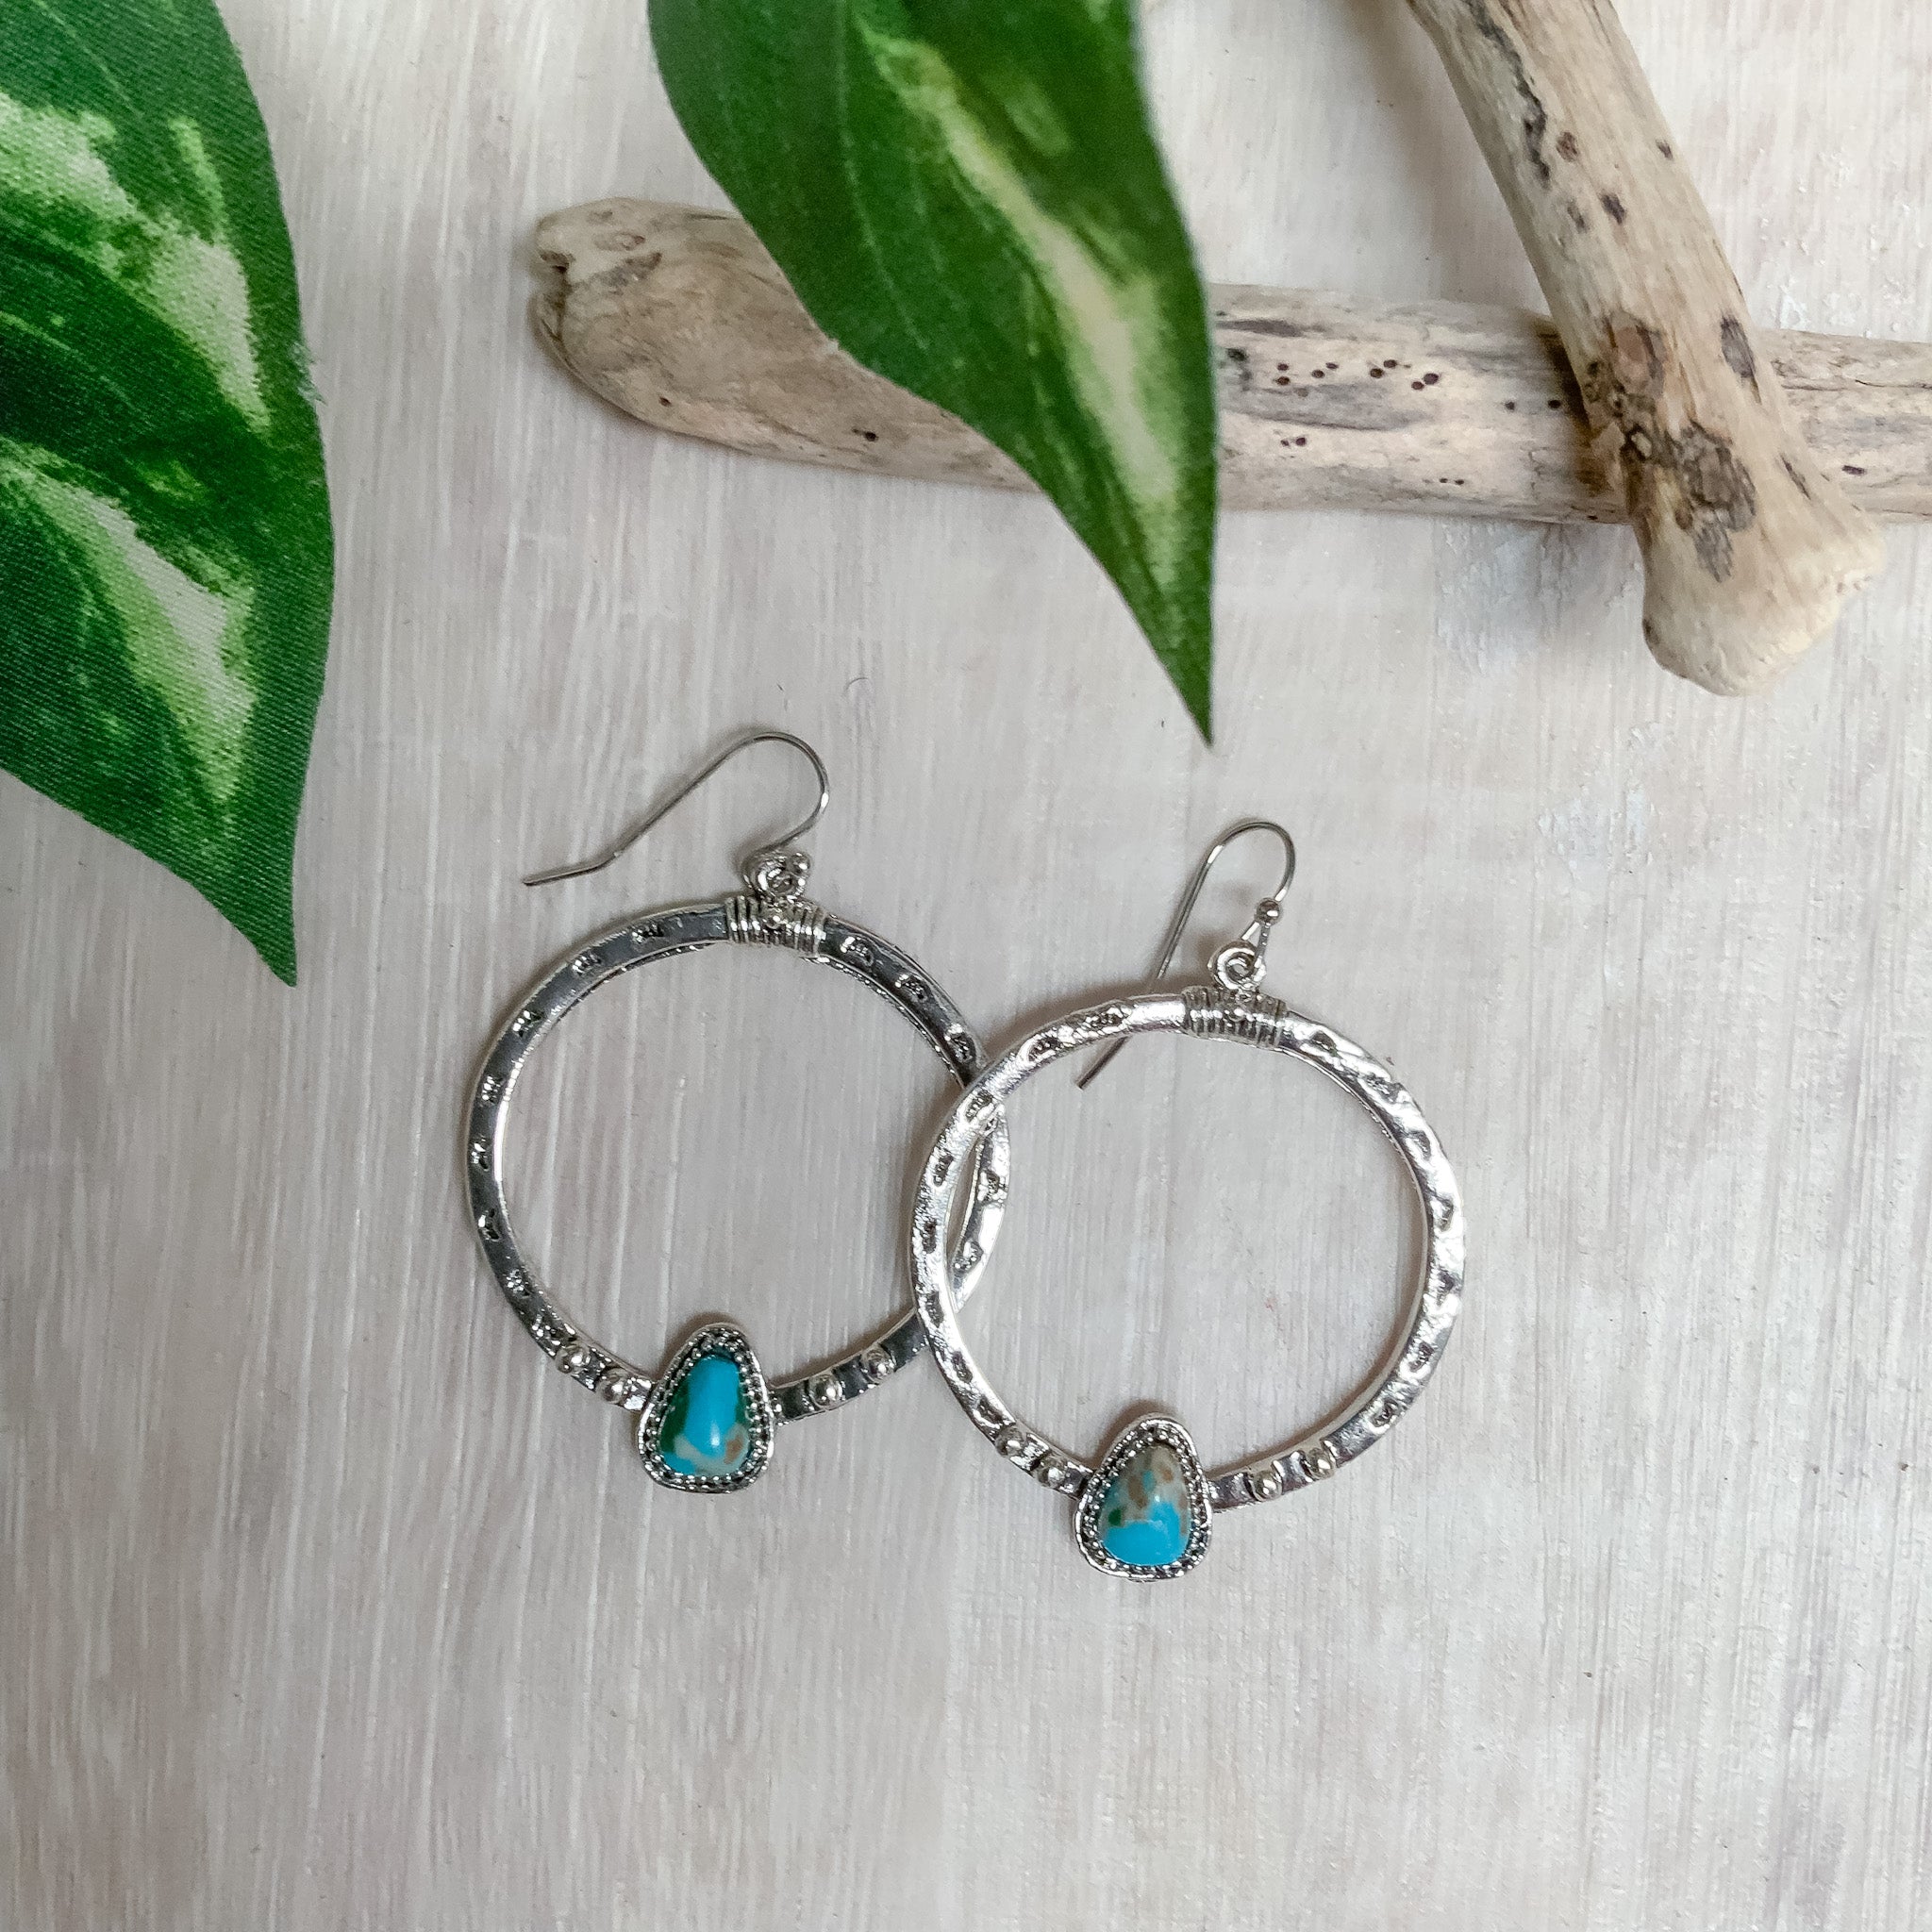 Antique Silver/Turquoise Bohemian Style Circle Drop Earrings